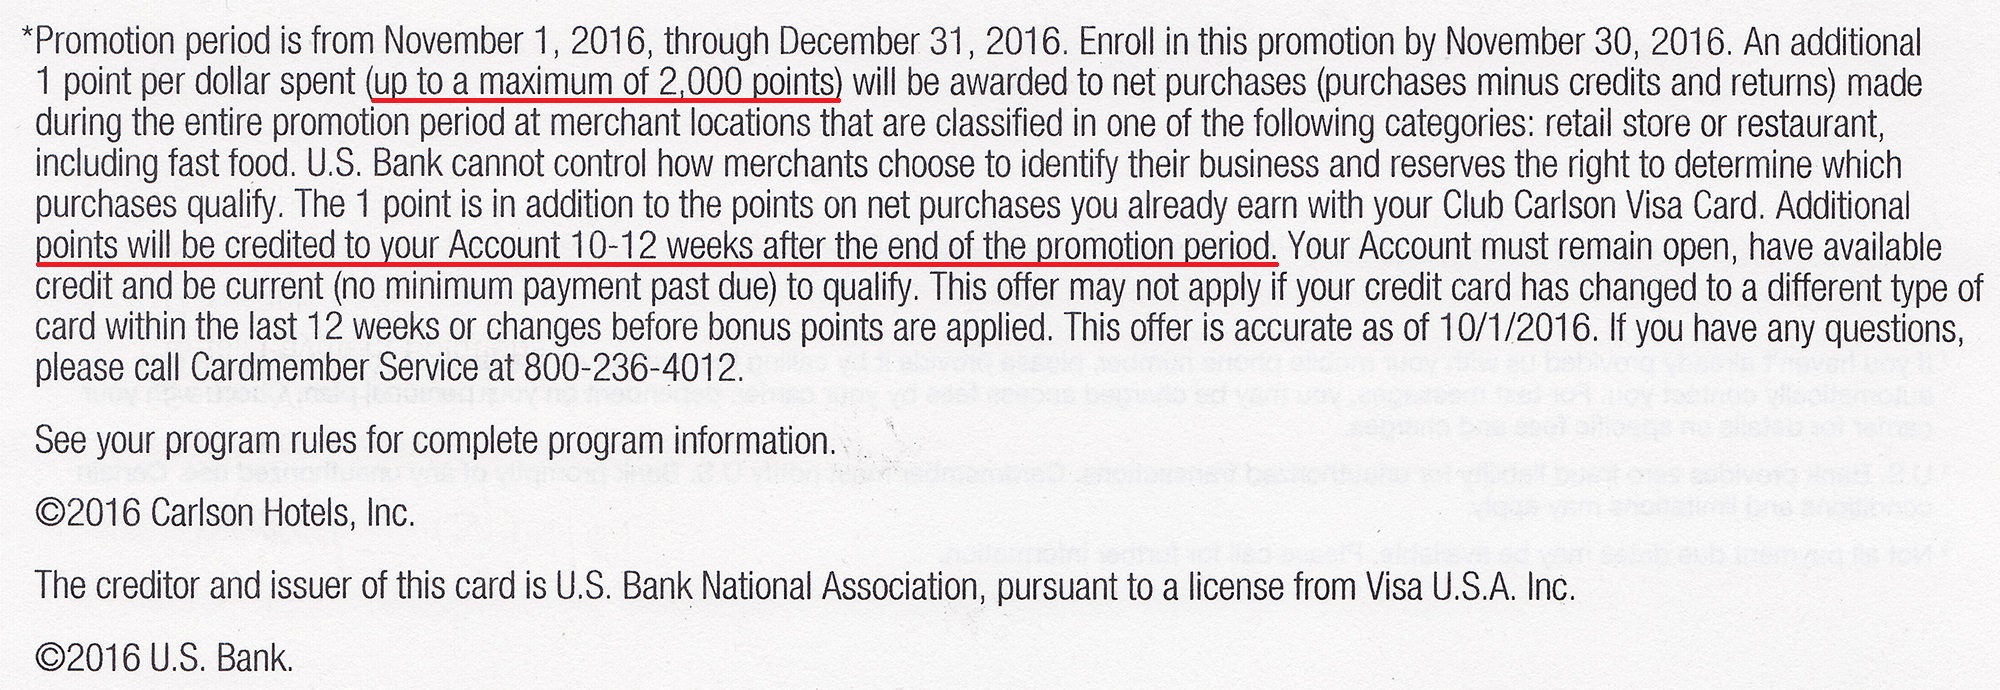 us-bank-club-carlson-personal-targeted-offer-11-1-2016-bottom